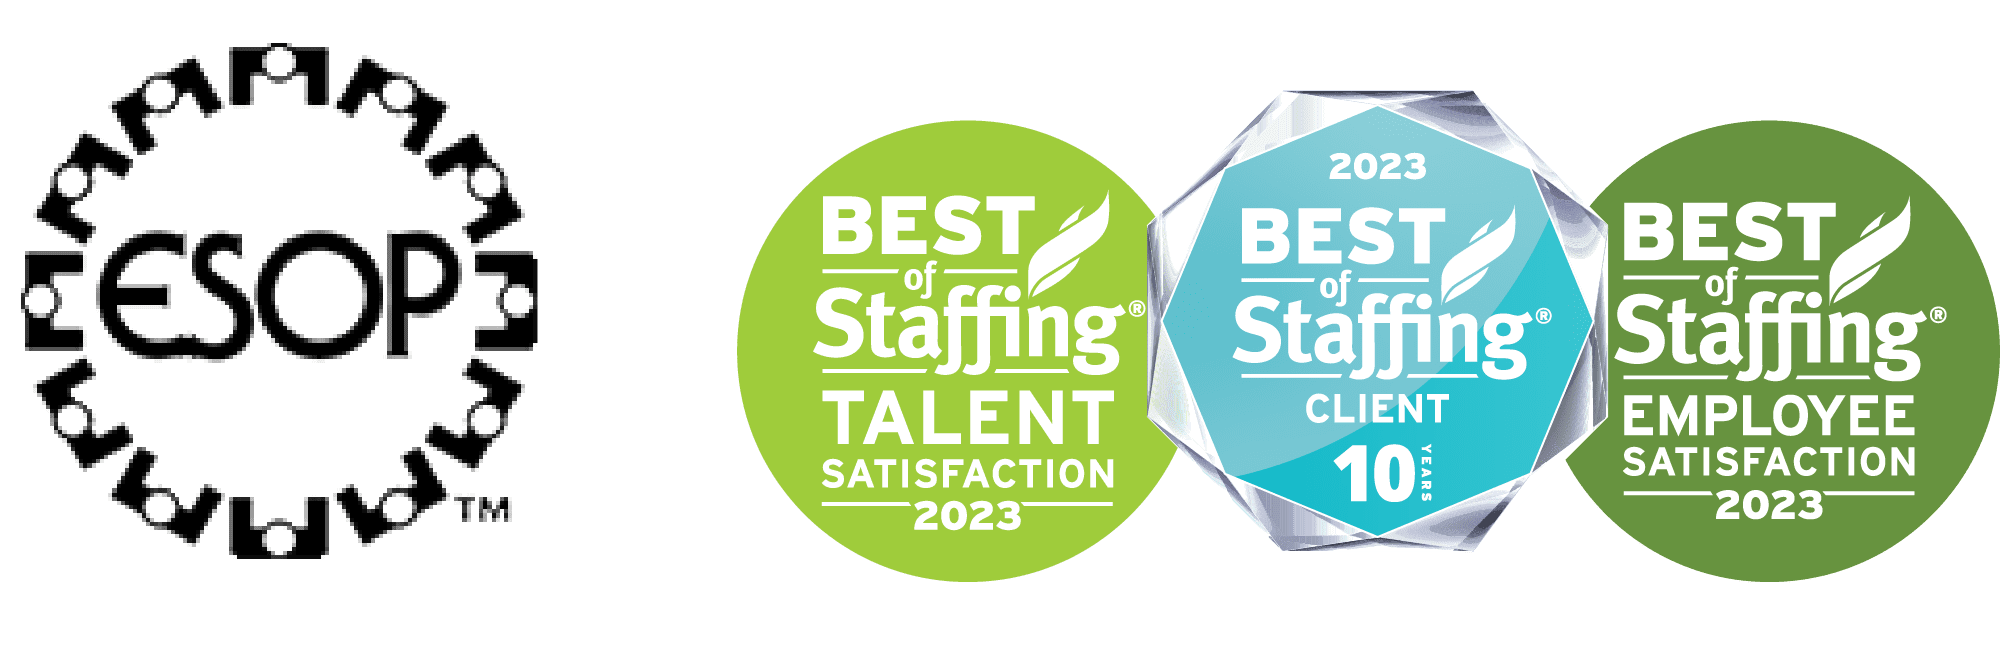 recruiting and staffing awards